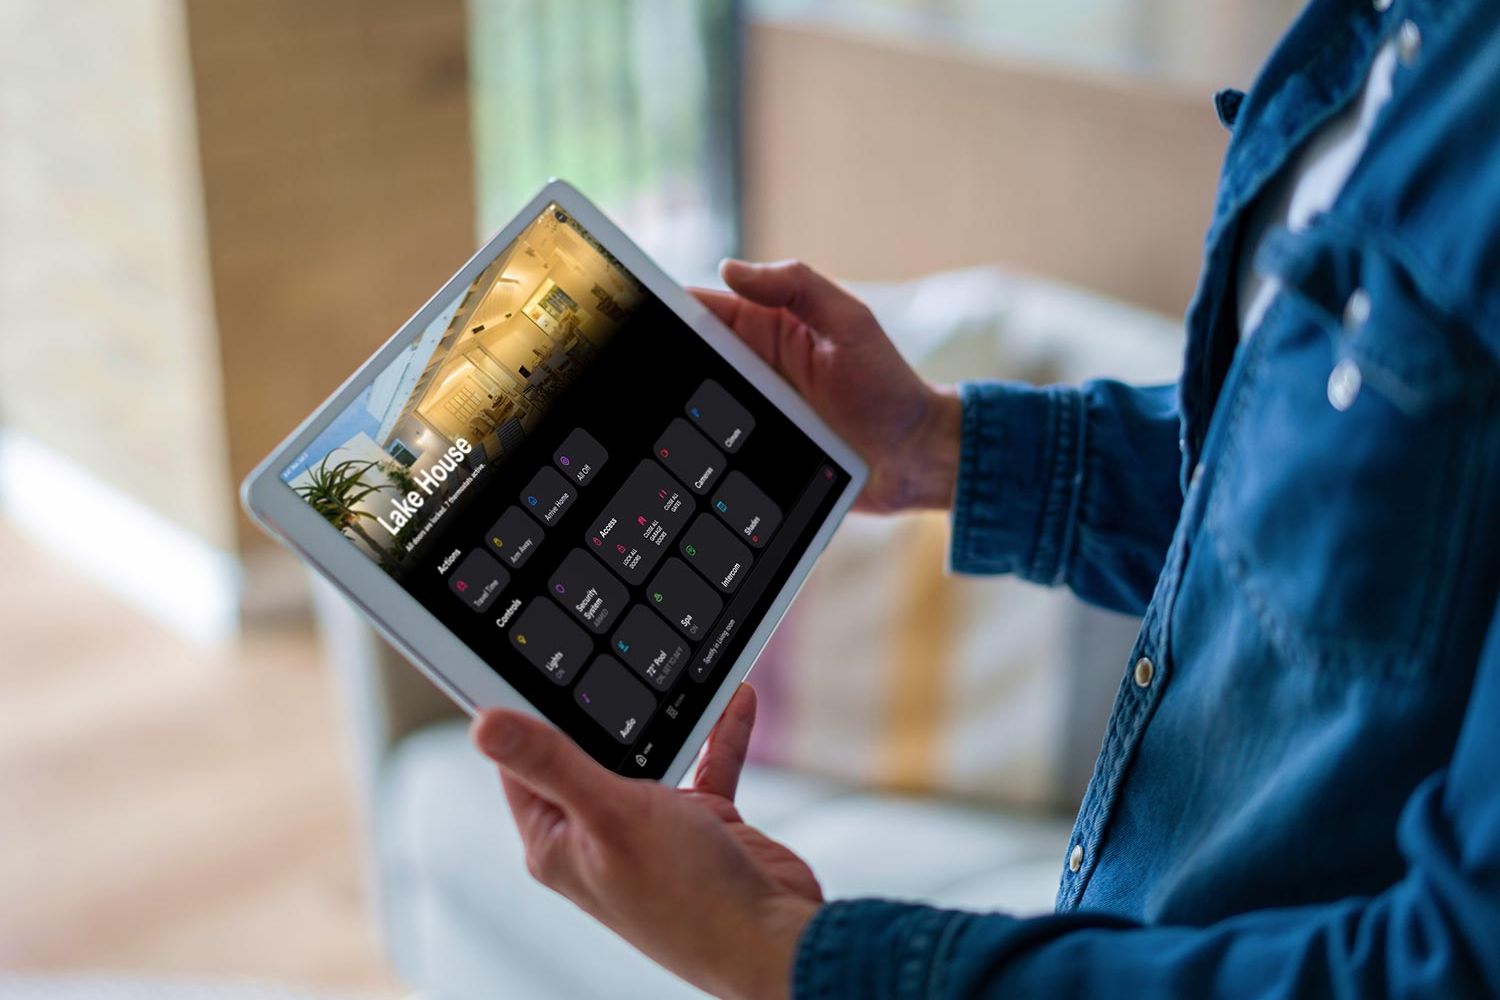 Person holding a tablet displaying Crestron home automation controls for "Lake House" with various room options and settings.